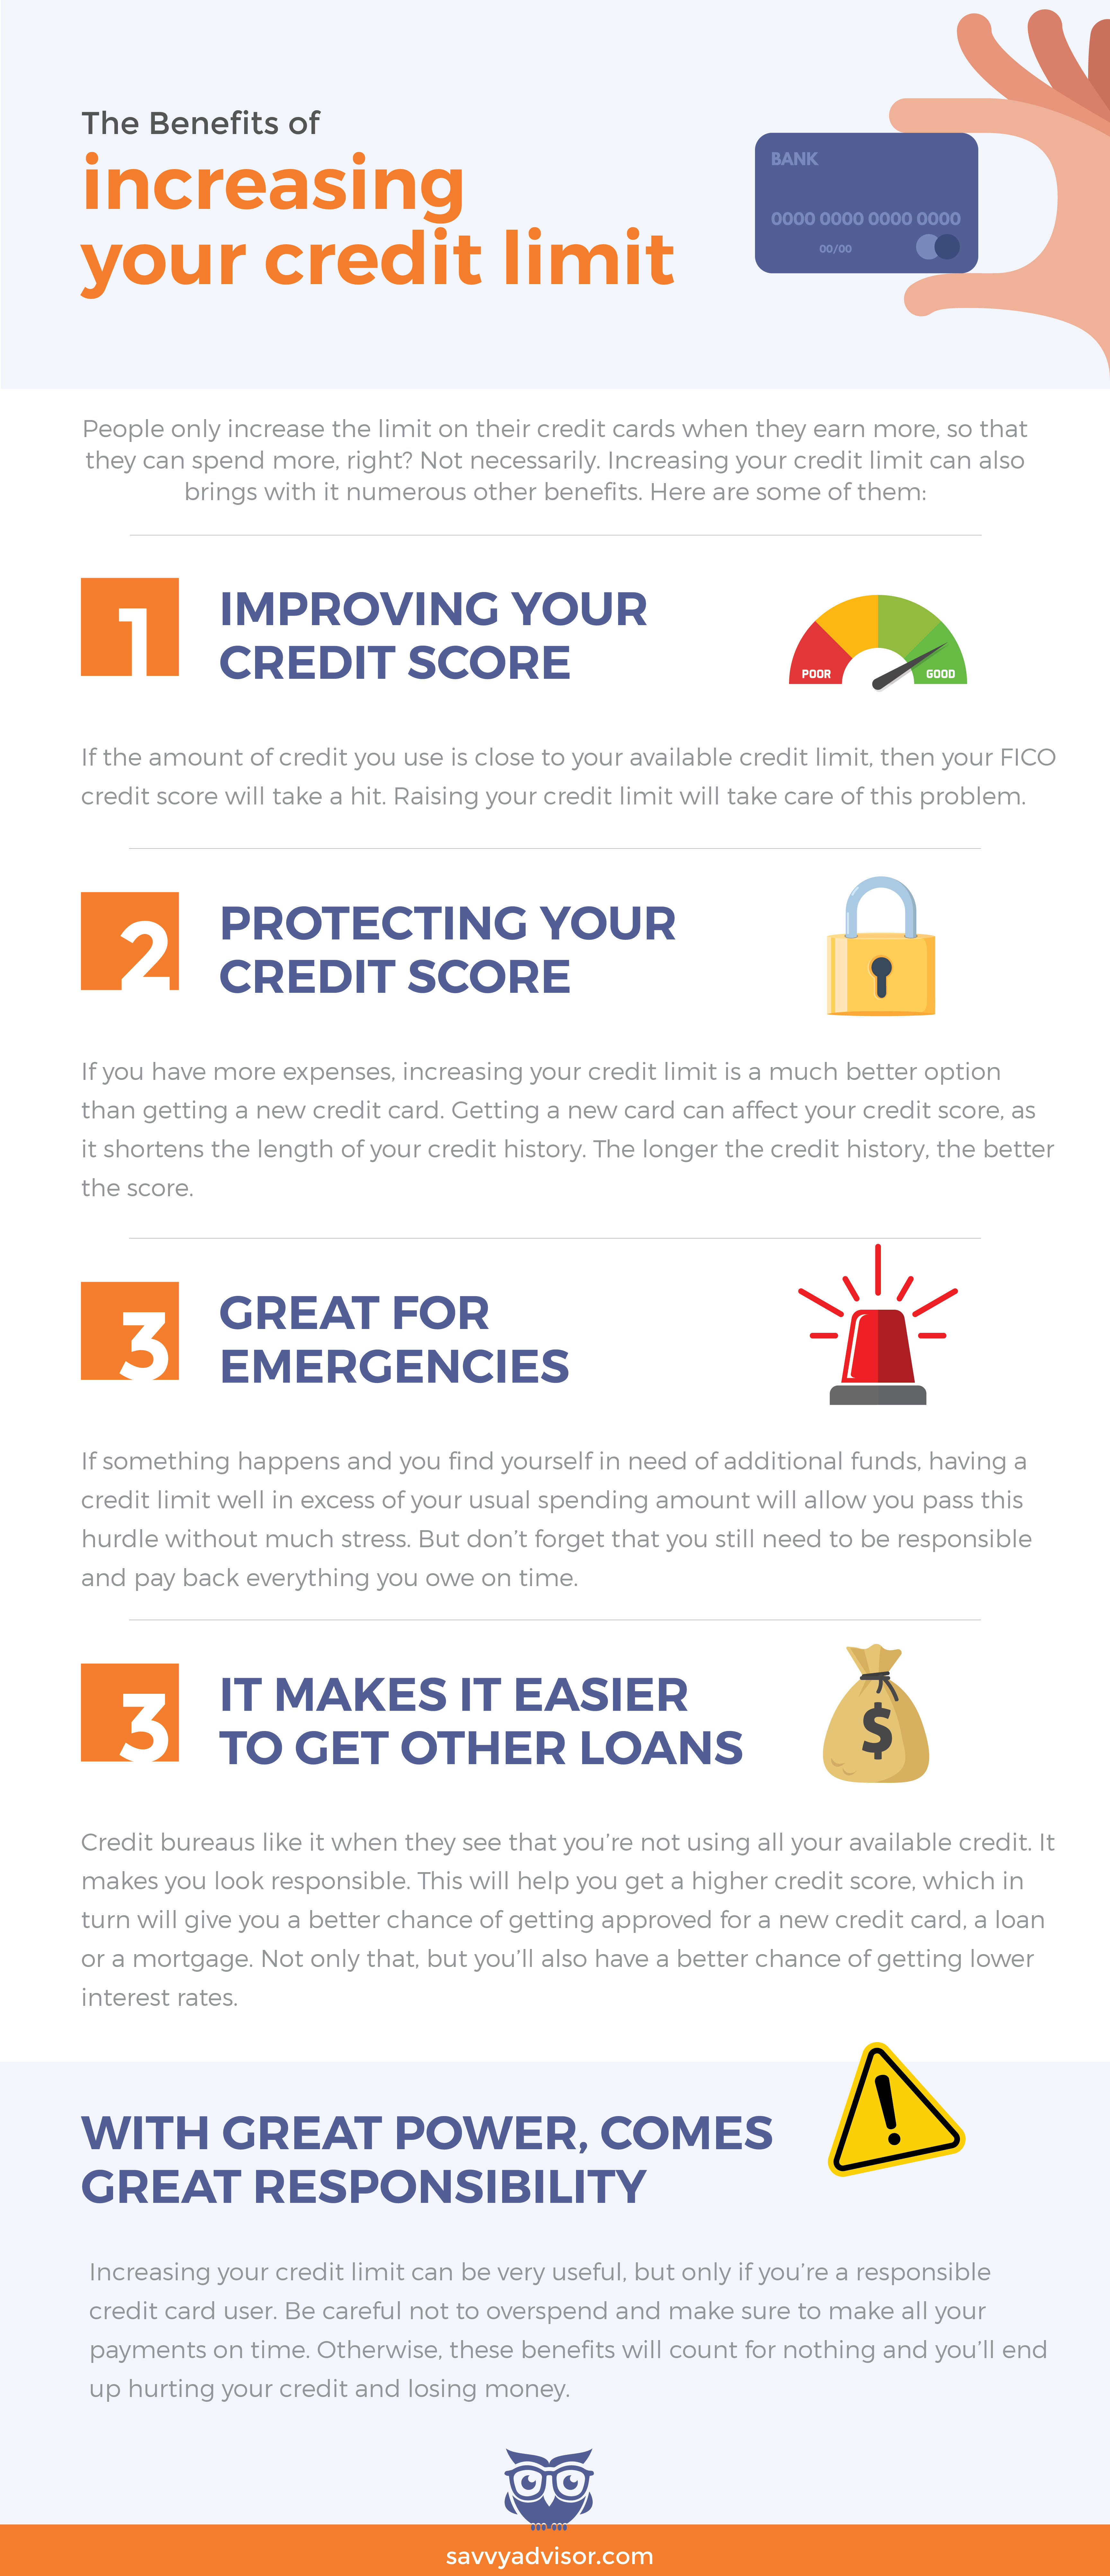 The benefits of increasing your credit limit - Infographic - SavvyAdvisor